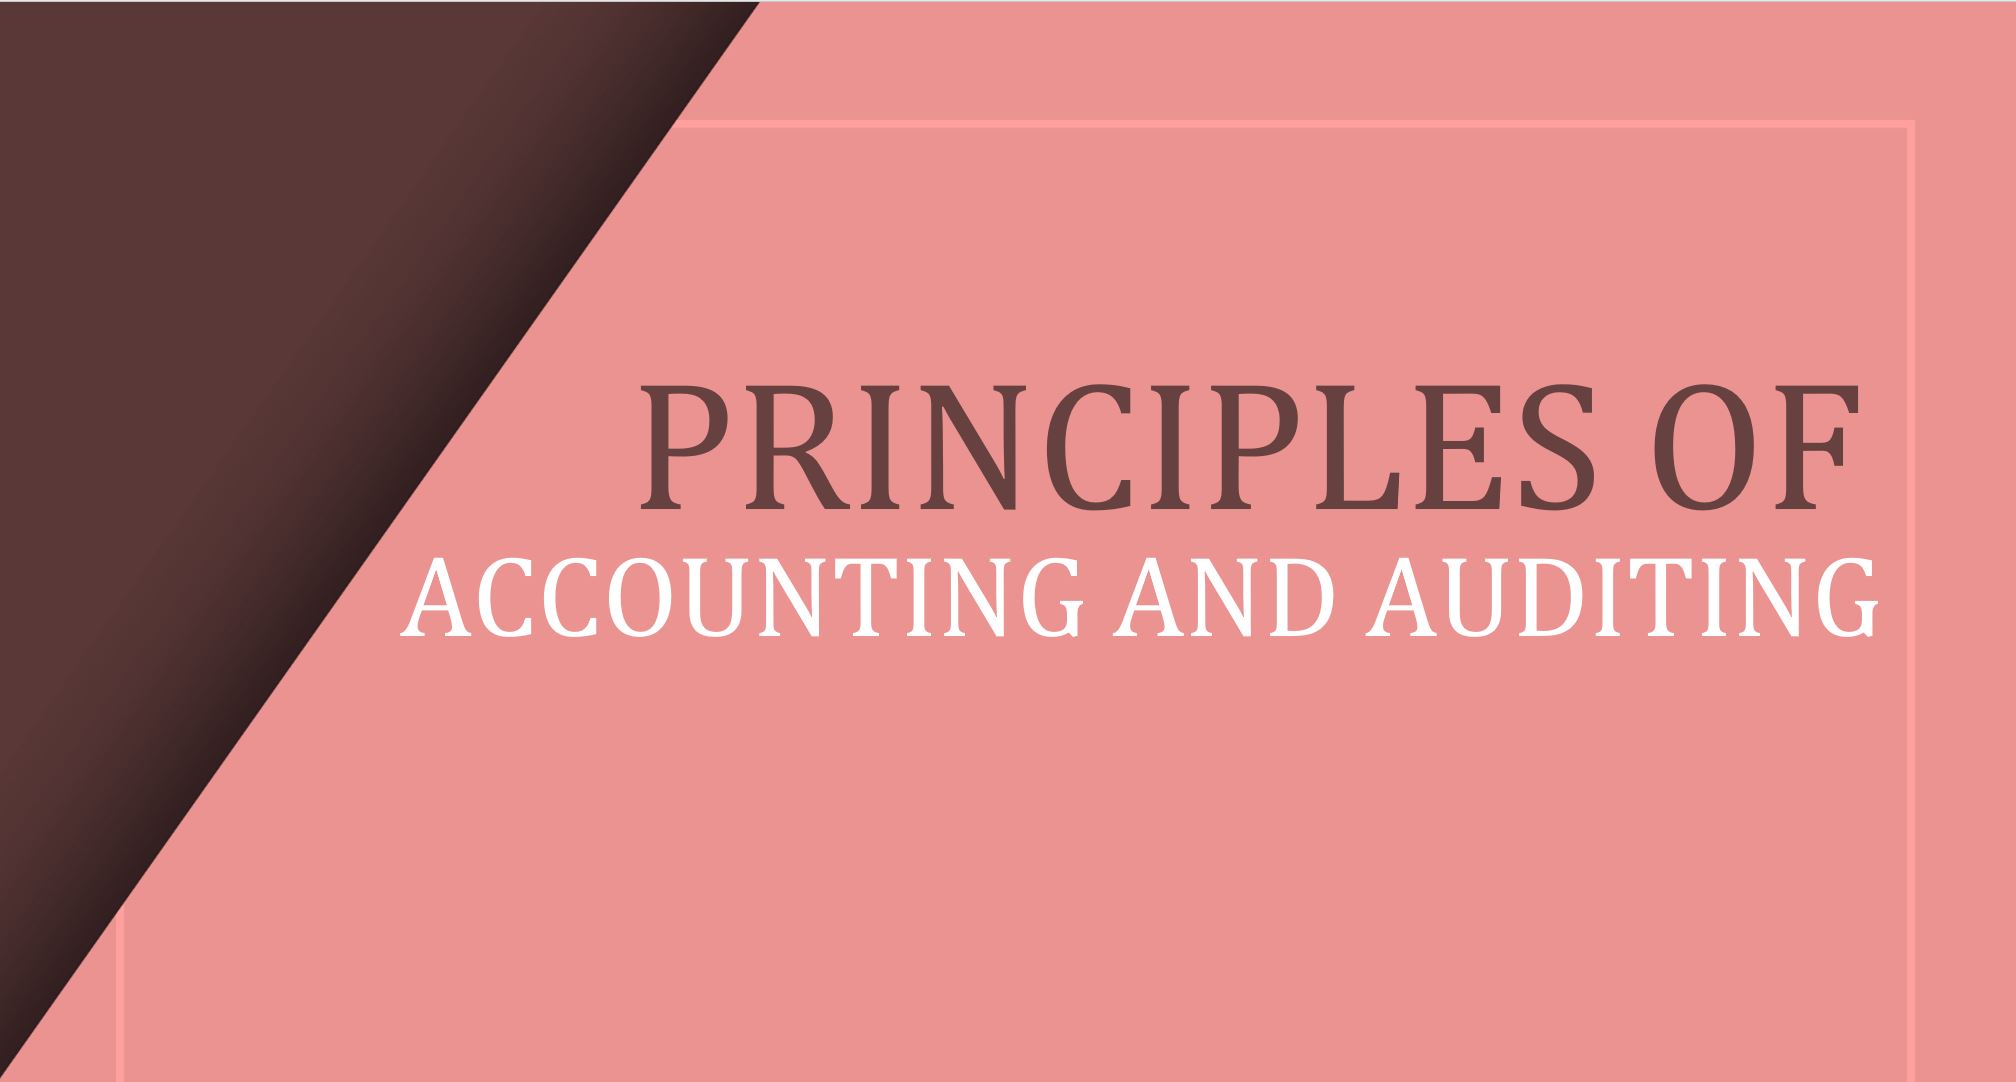 T5: Principles of Accounting and Auditing